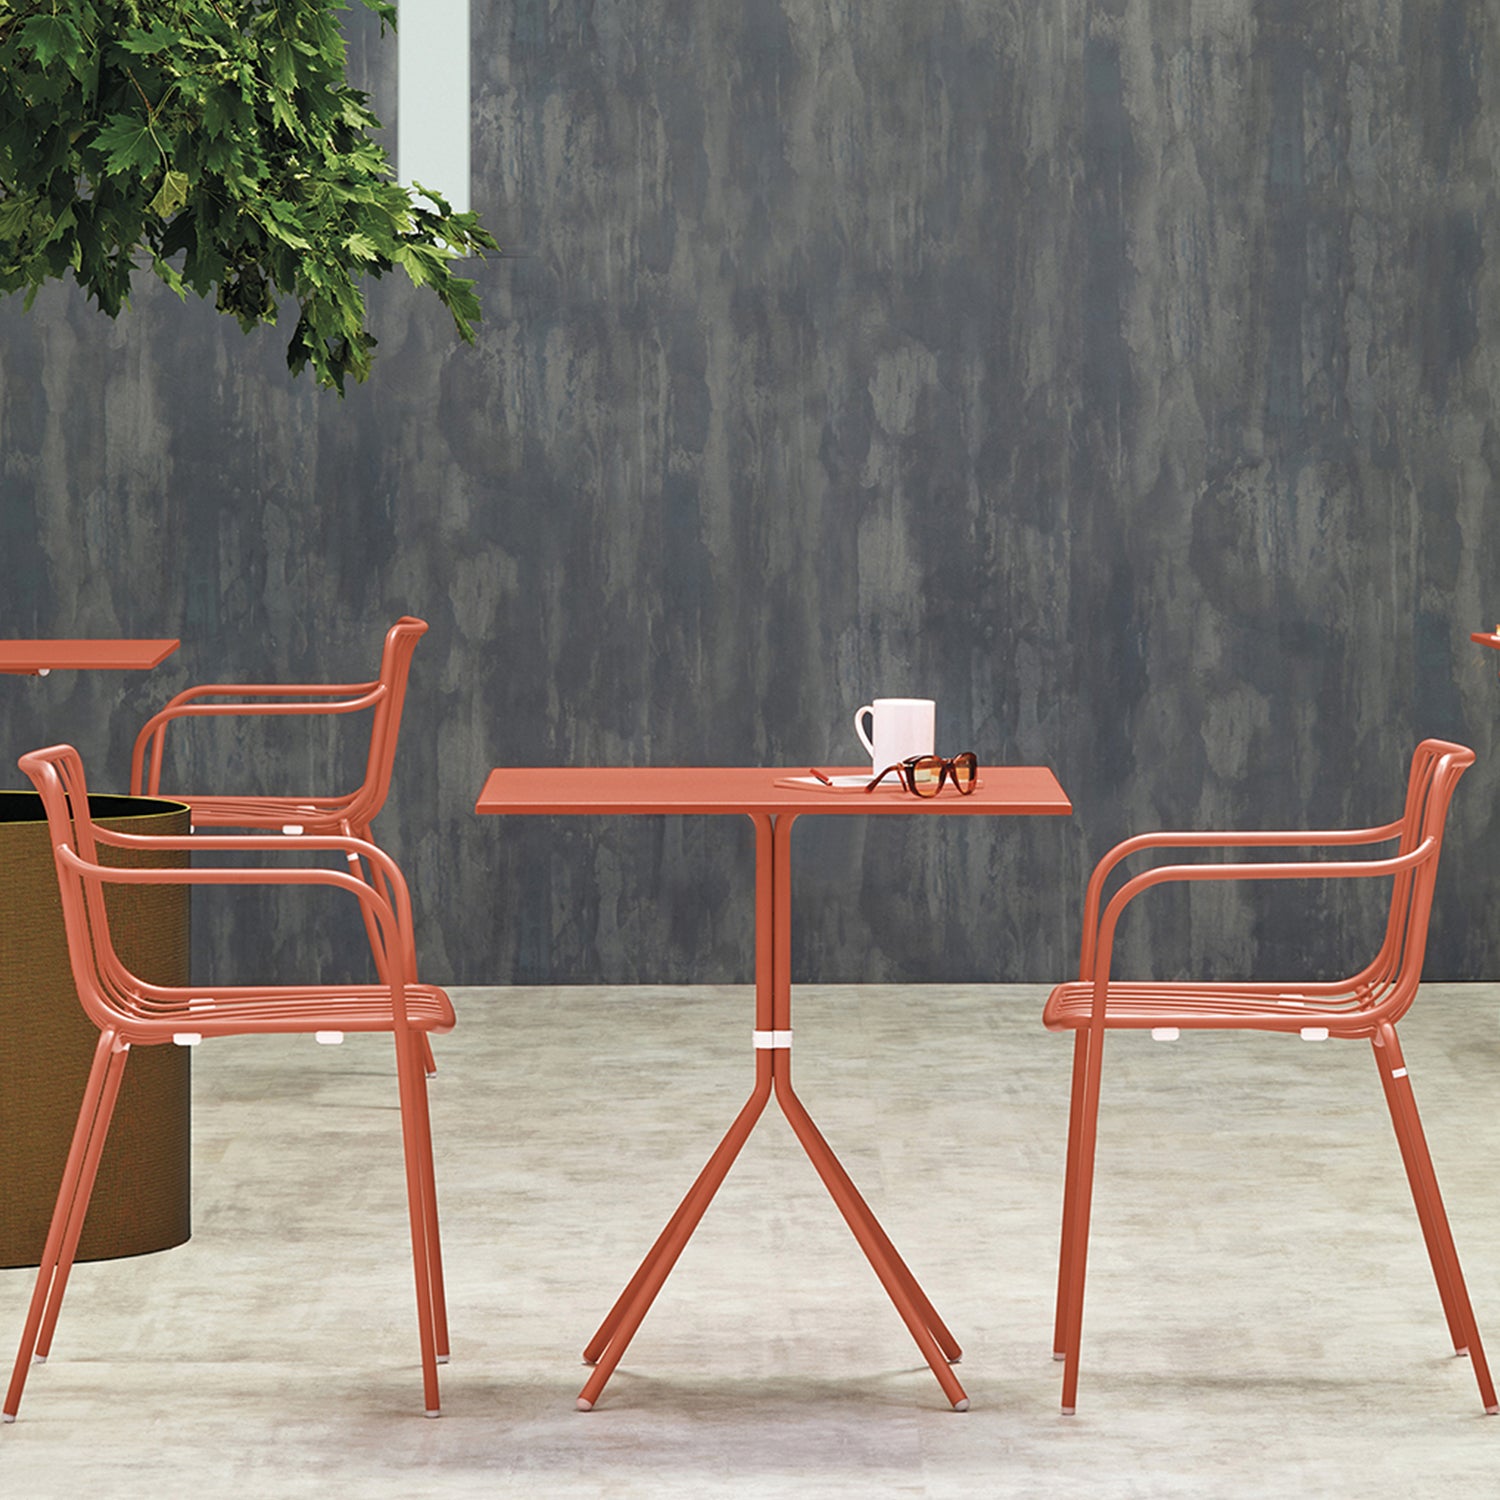 Pedrali Nolita 3656 garden dining armchair in terracotta with matching table